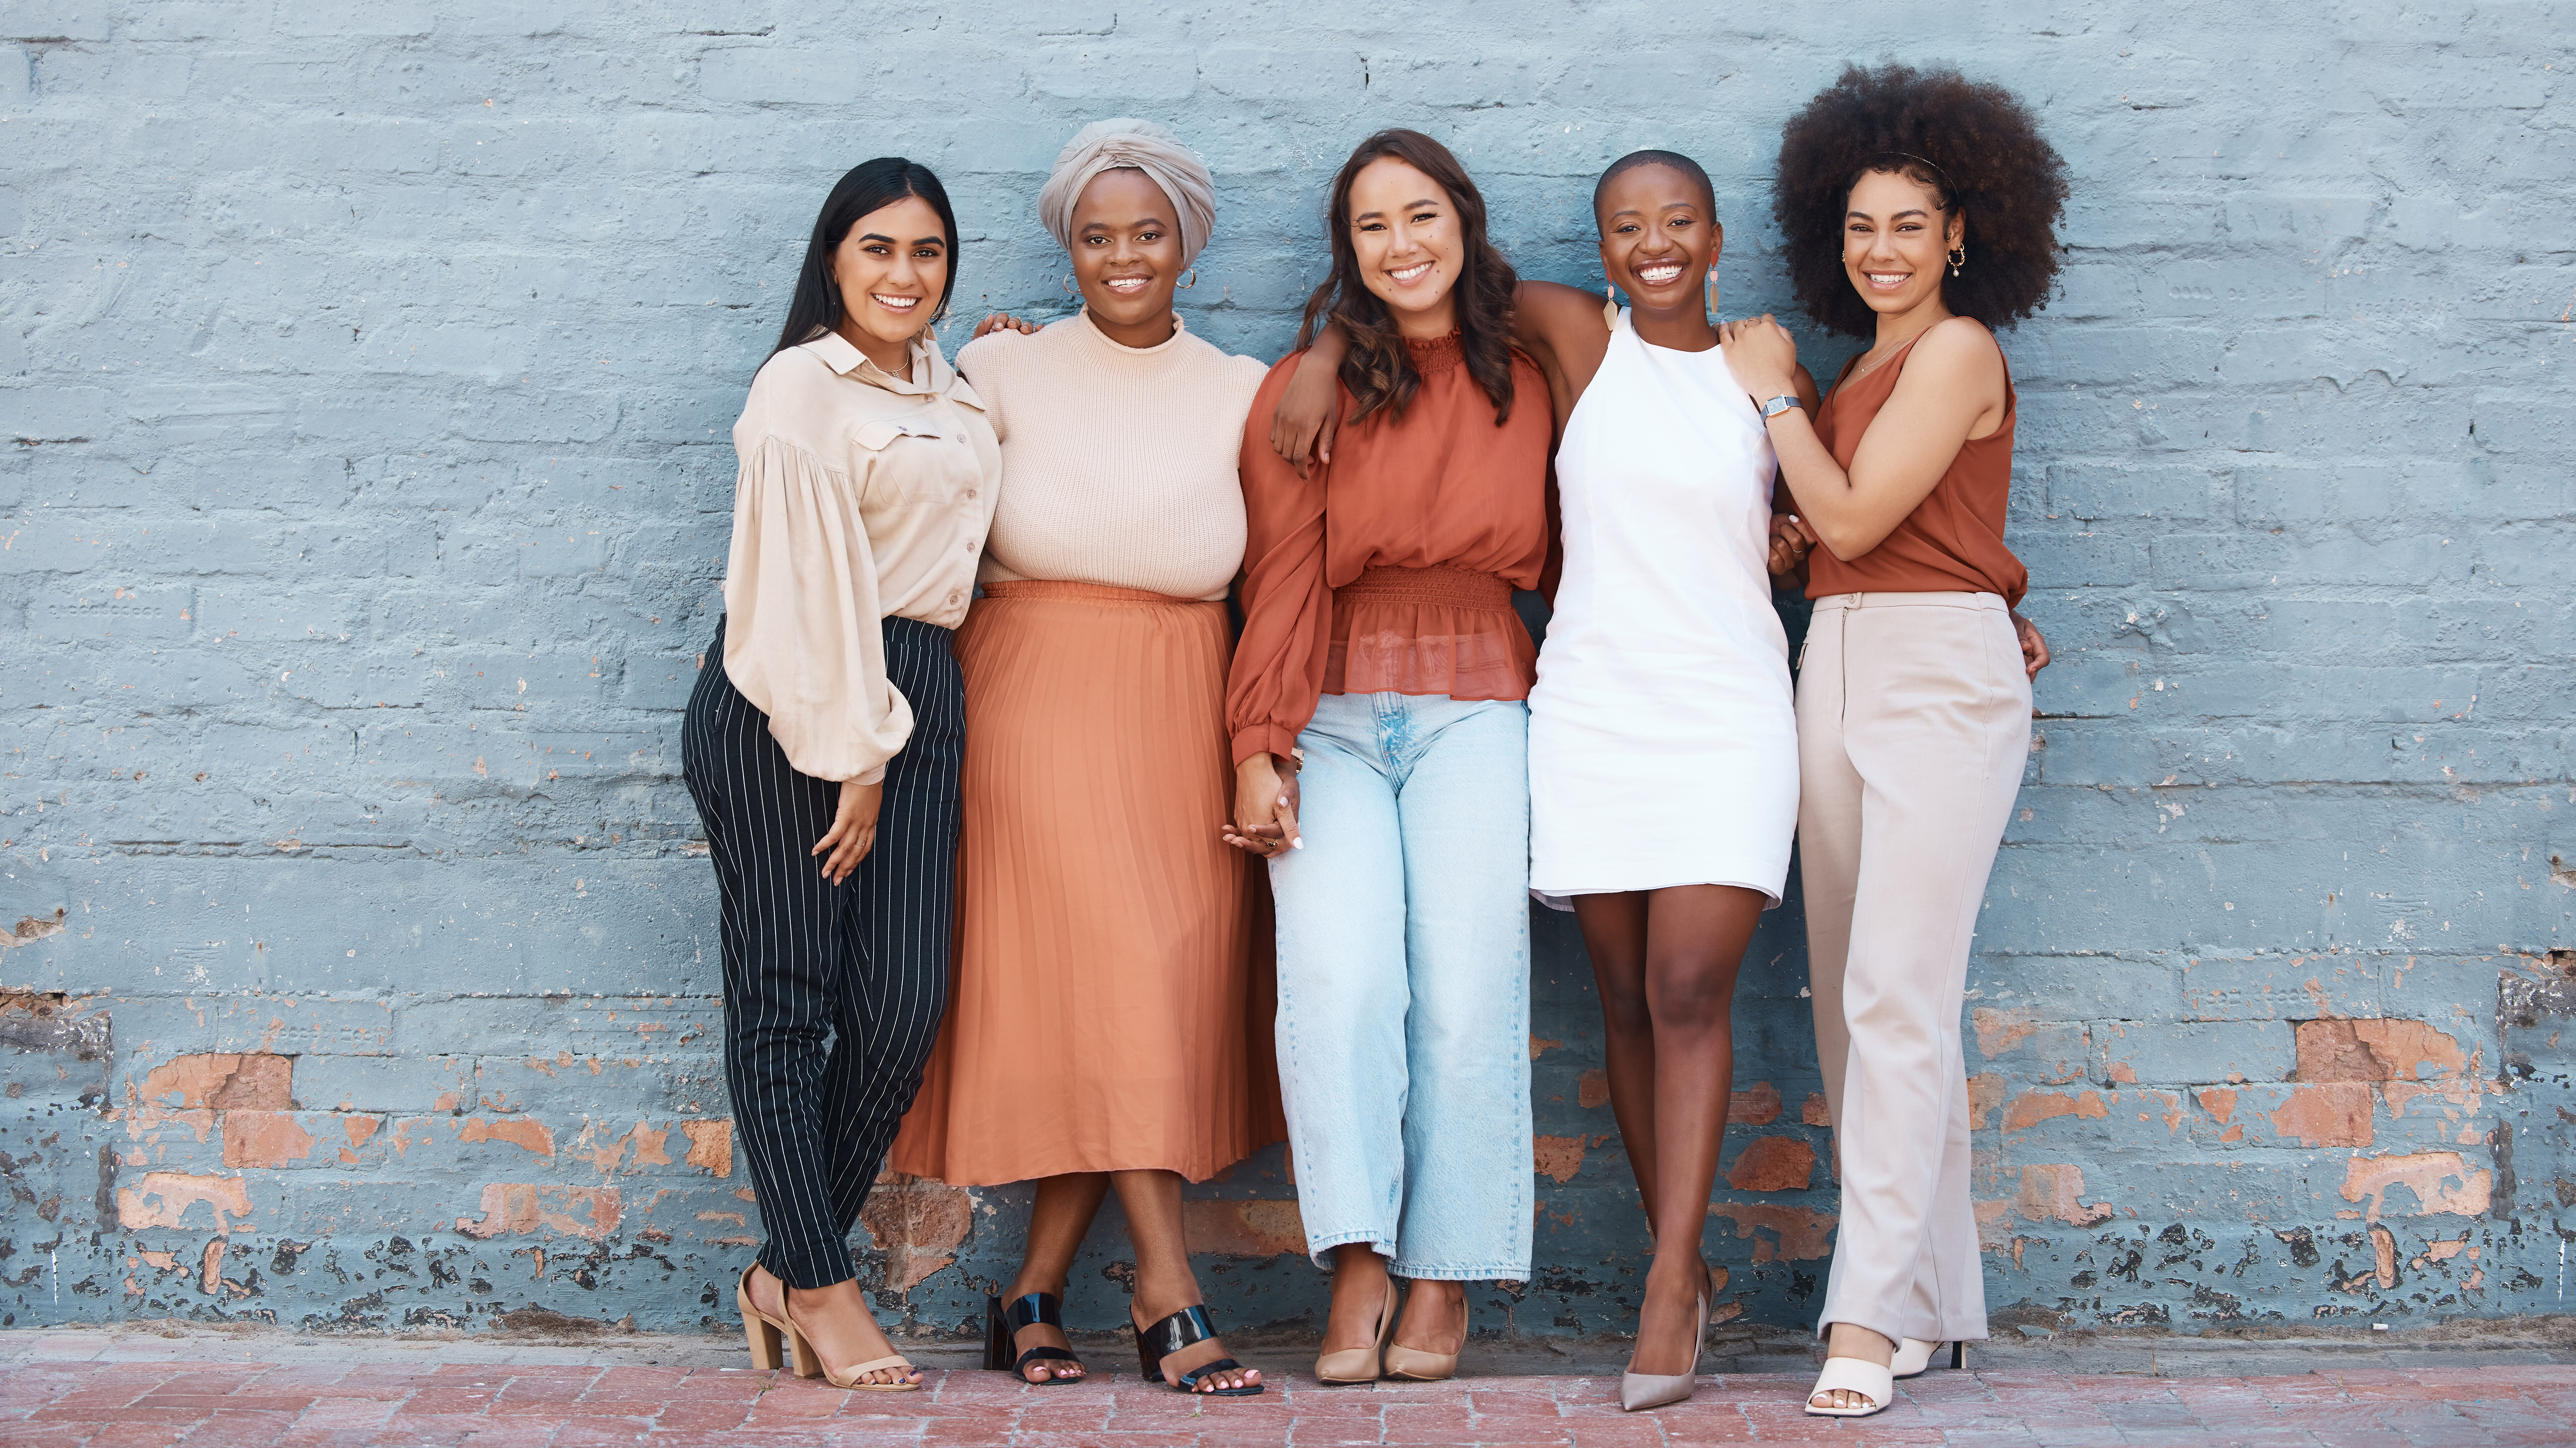 Group of 5 young adult women of diverse ethnicities embracing and smiling